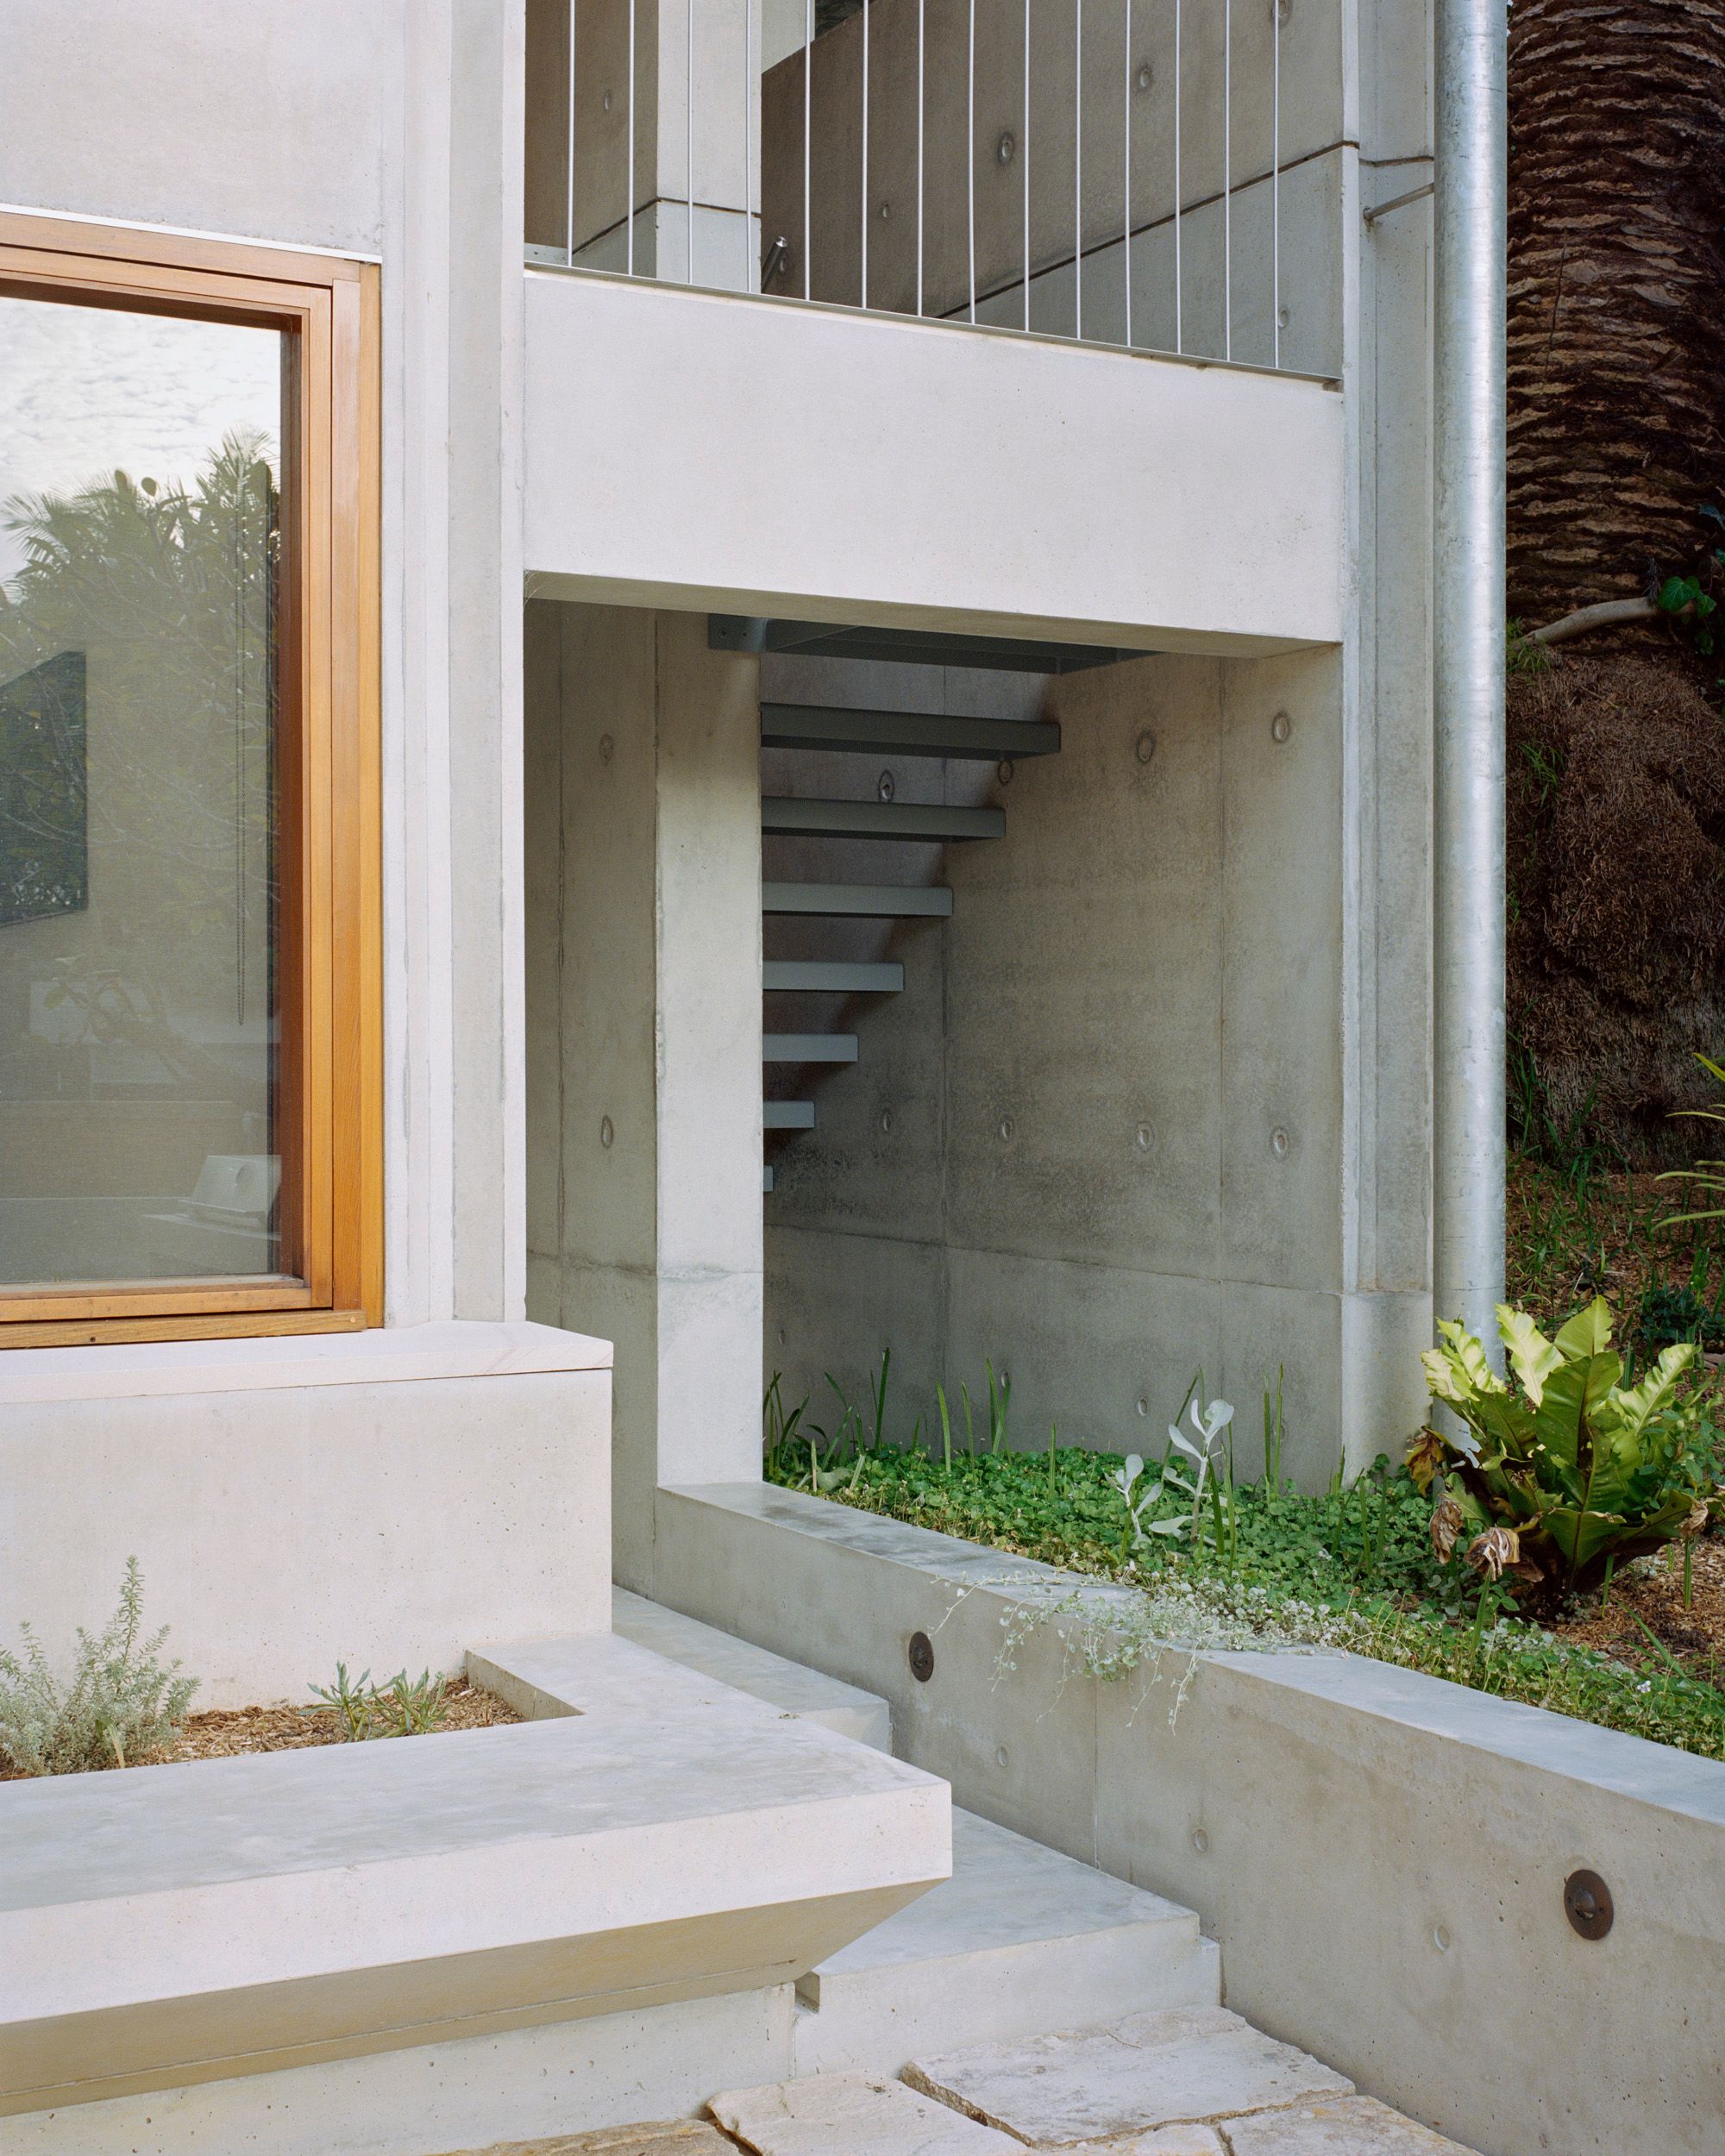 Lee House by Candalepas Associates. Detailed view of rear extension, steps down to courtyard. 